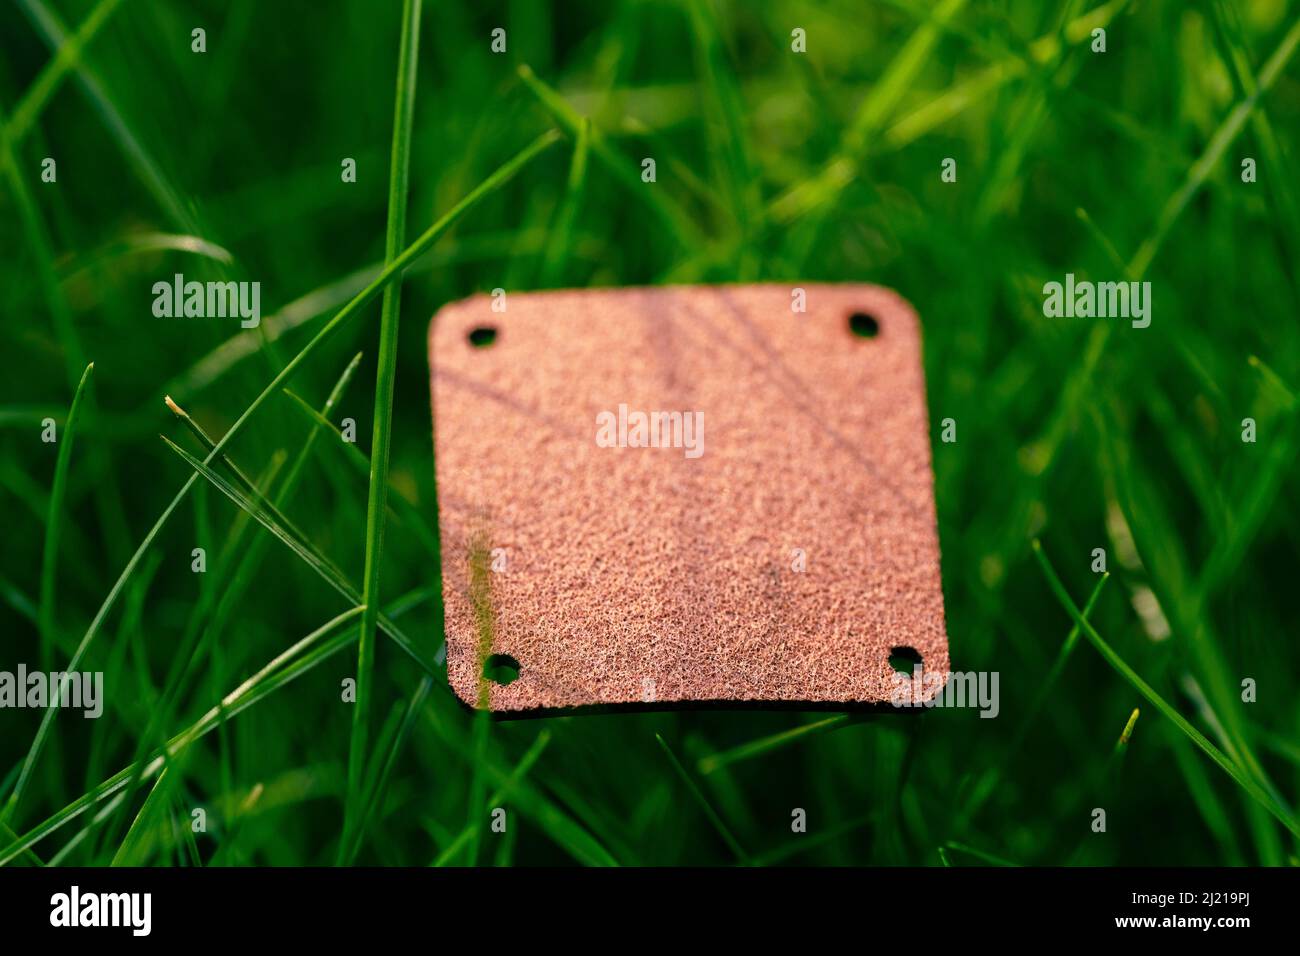 Top view of frame made of green spring grass and one brown leather patch for sale with copy space for logo. Natural concept. Stock Photo